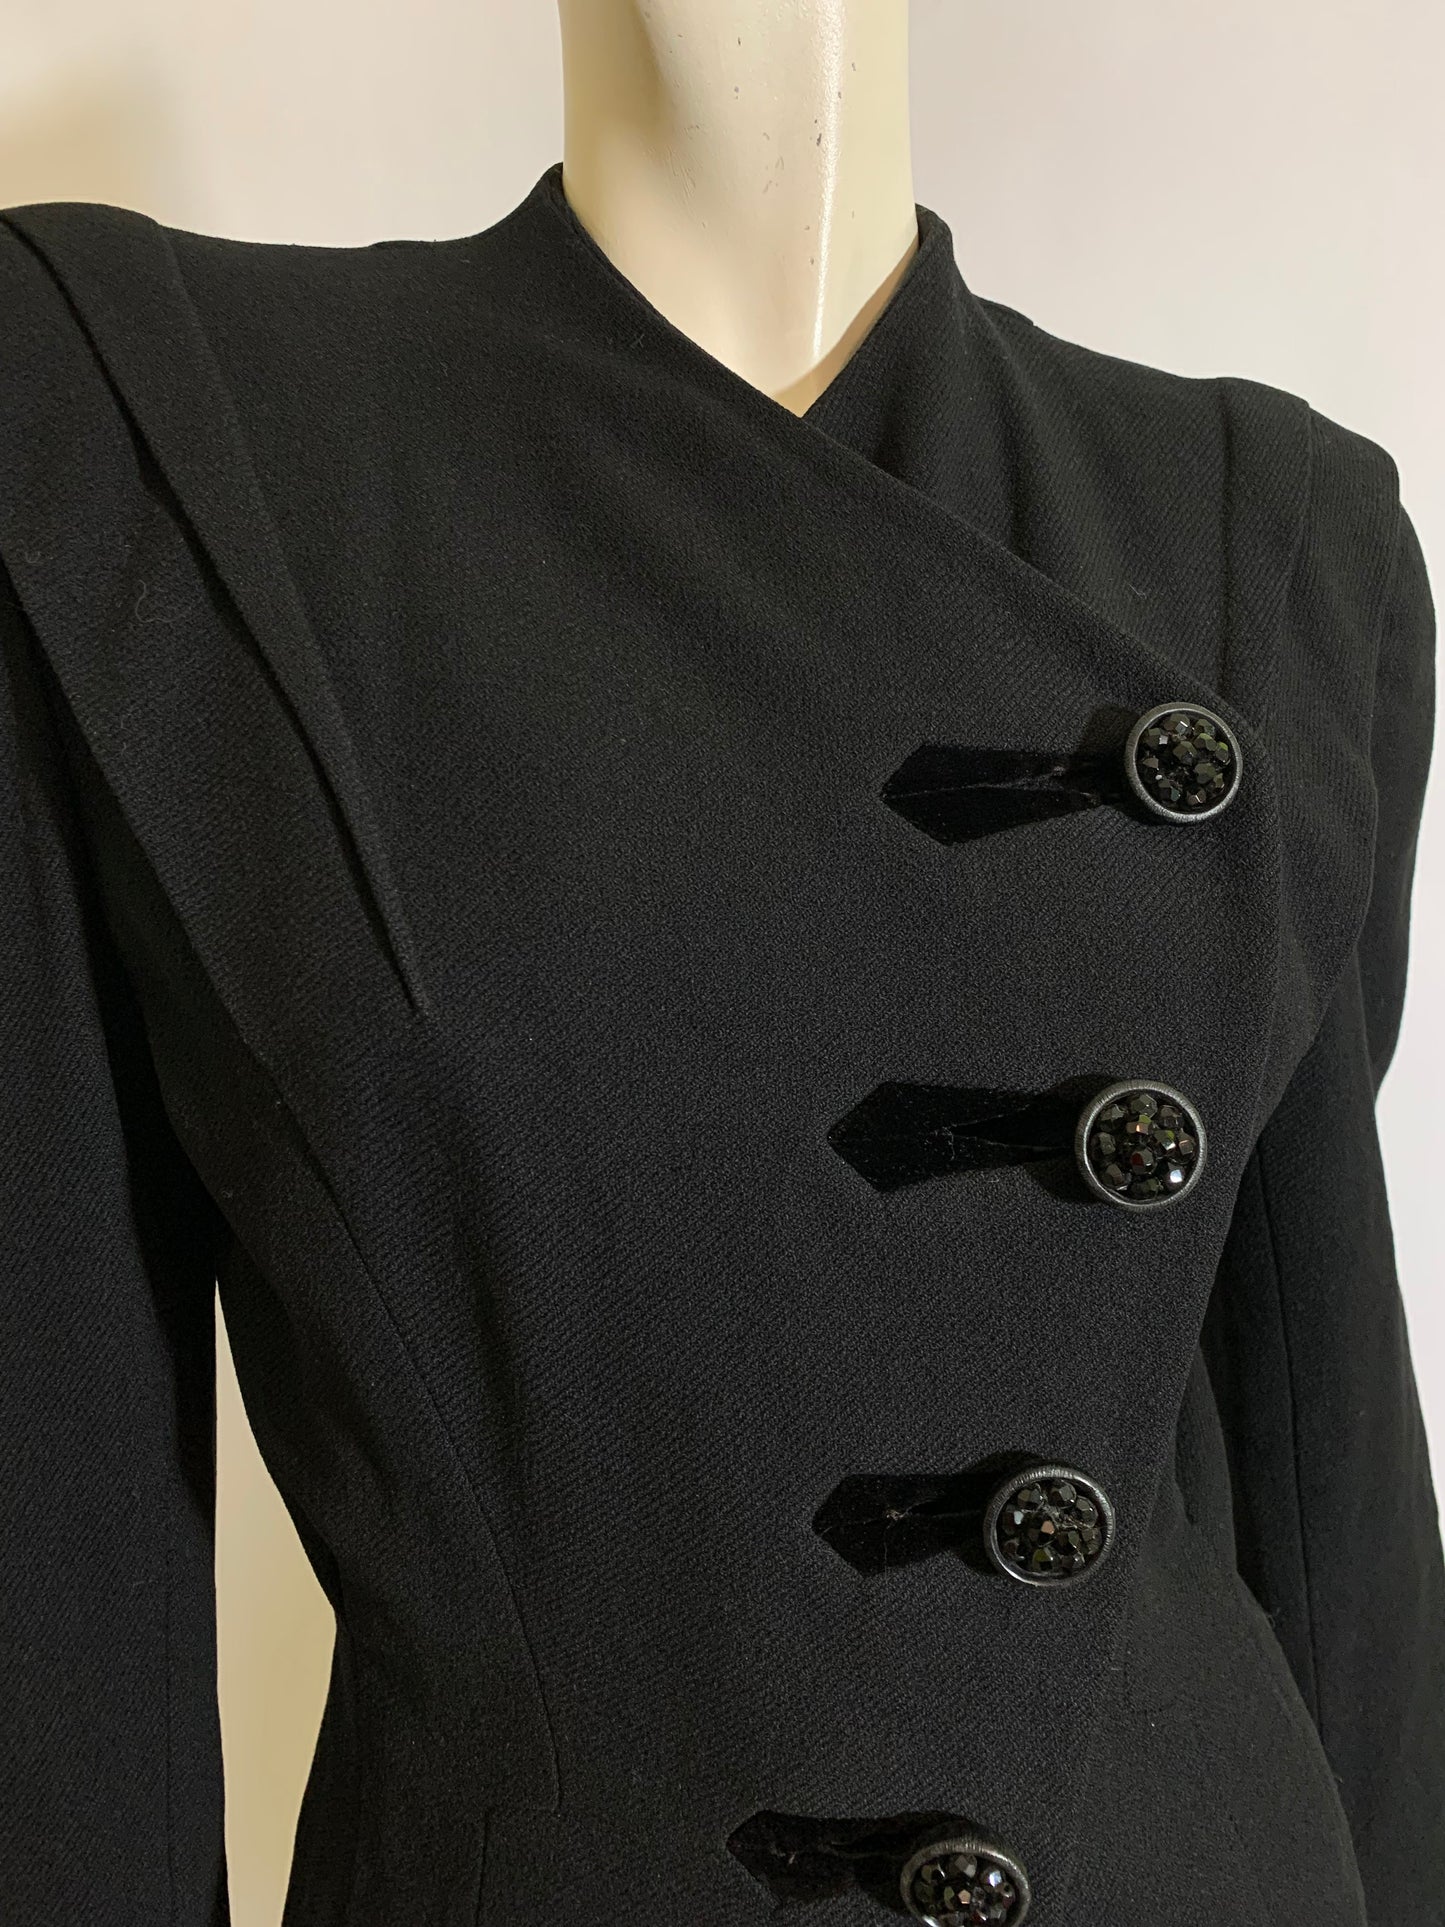 Panther Black Wool Nipped Waist Suit Jacket with Velvet Buttonholes and Bejeweled Buttons circa 1940s